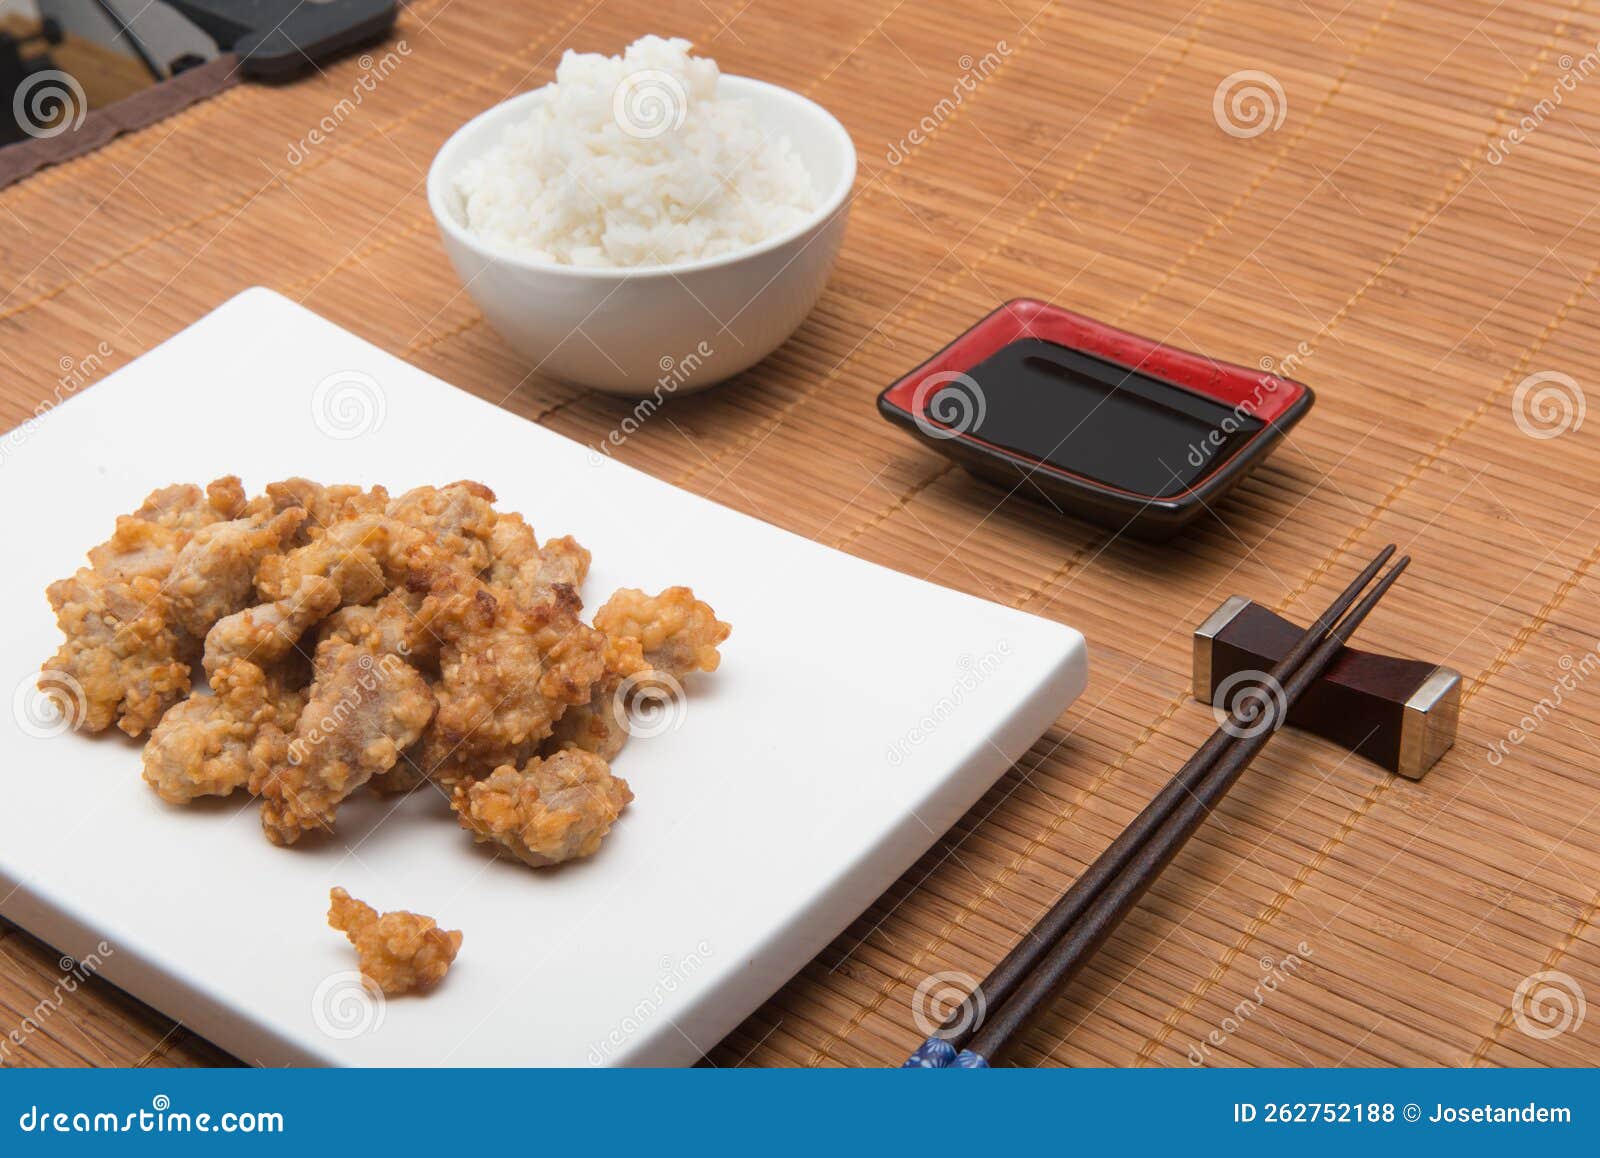 sesame chicken dish and chopsticks on bamboo placemat